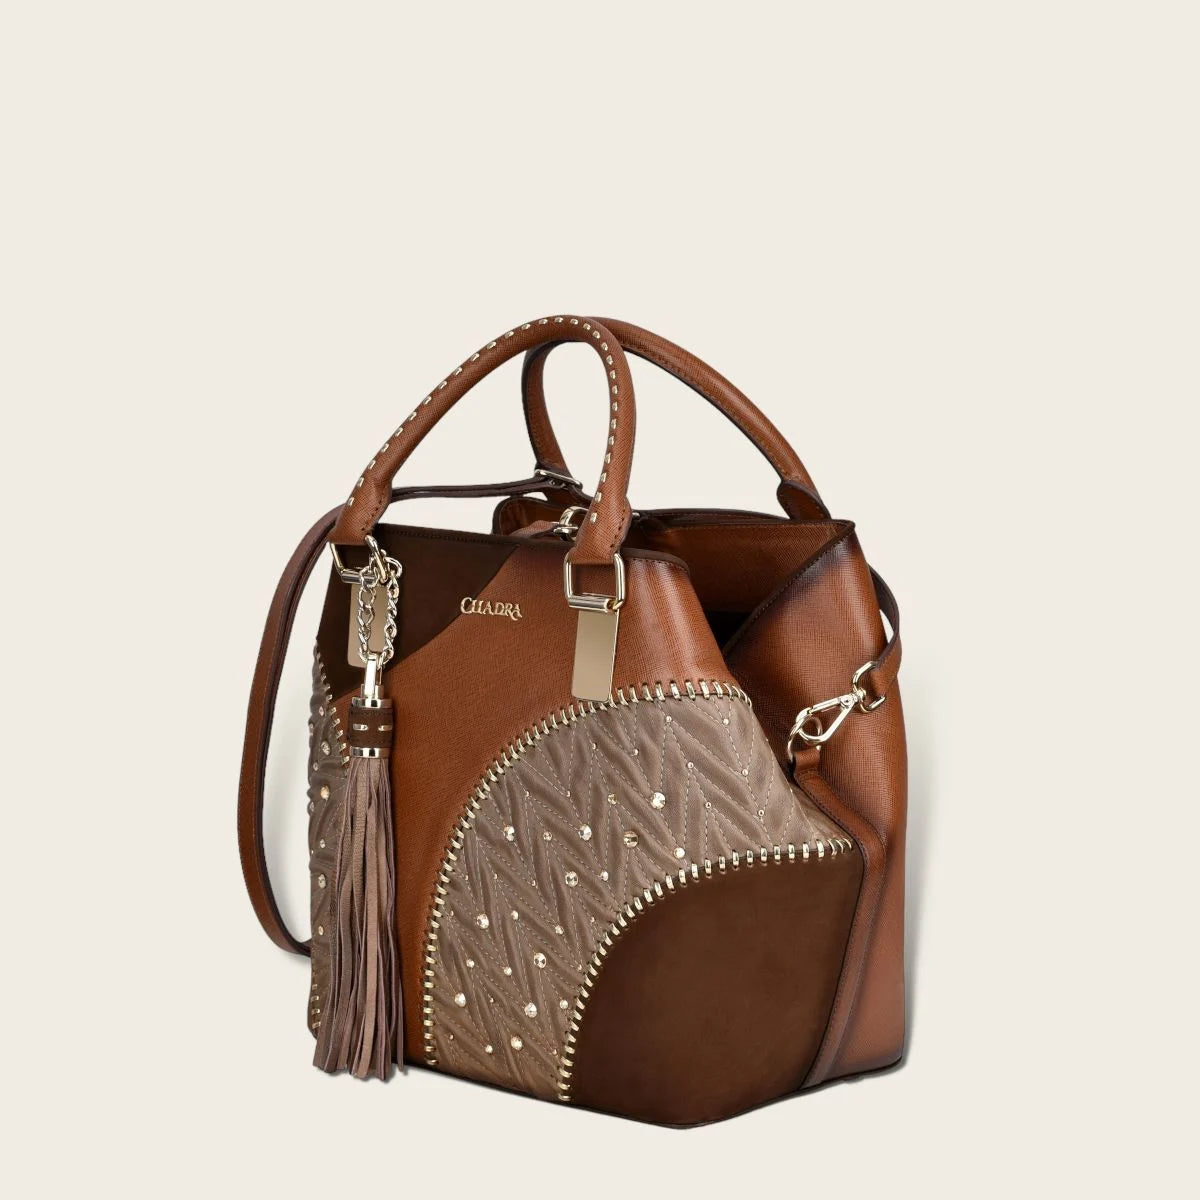 Brown leather tote bag with contrasting geometric motifs